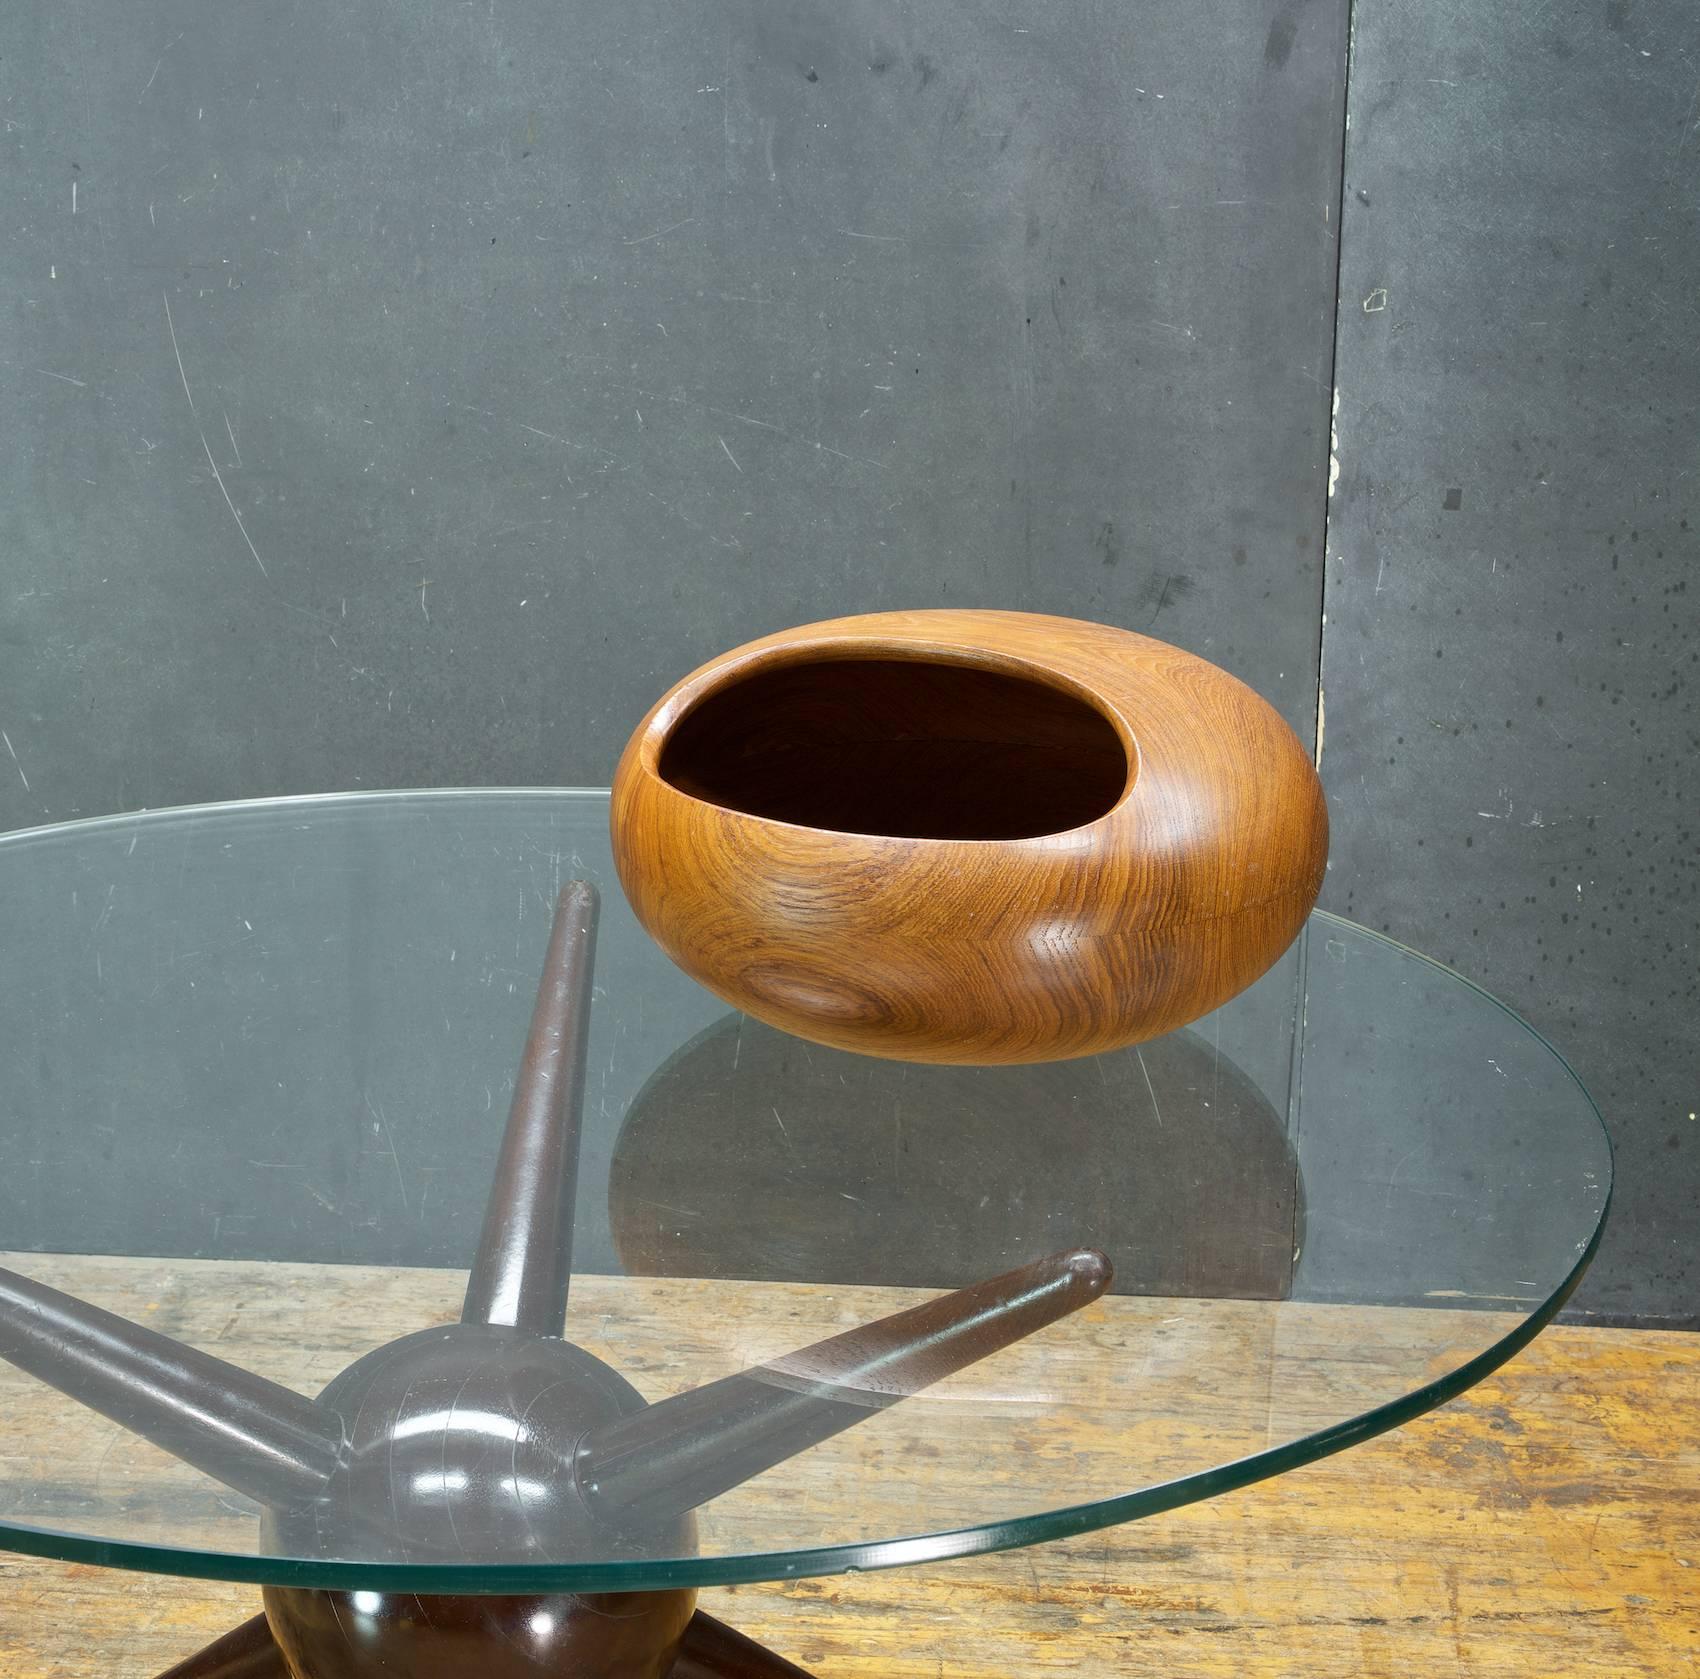 Rare bowl designed and made by Sigvard Nilsson, Söwe konst. Made from solid teak and sculpted by hand in Sweden, c.1951. Centerpiece of Nut Bowl or Covered salad serrving bowl. 

An Iconic Scandinavian design. In the manner of all the greats of the